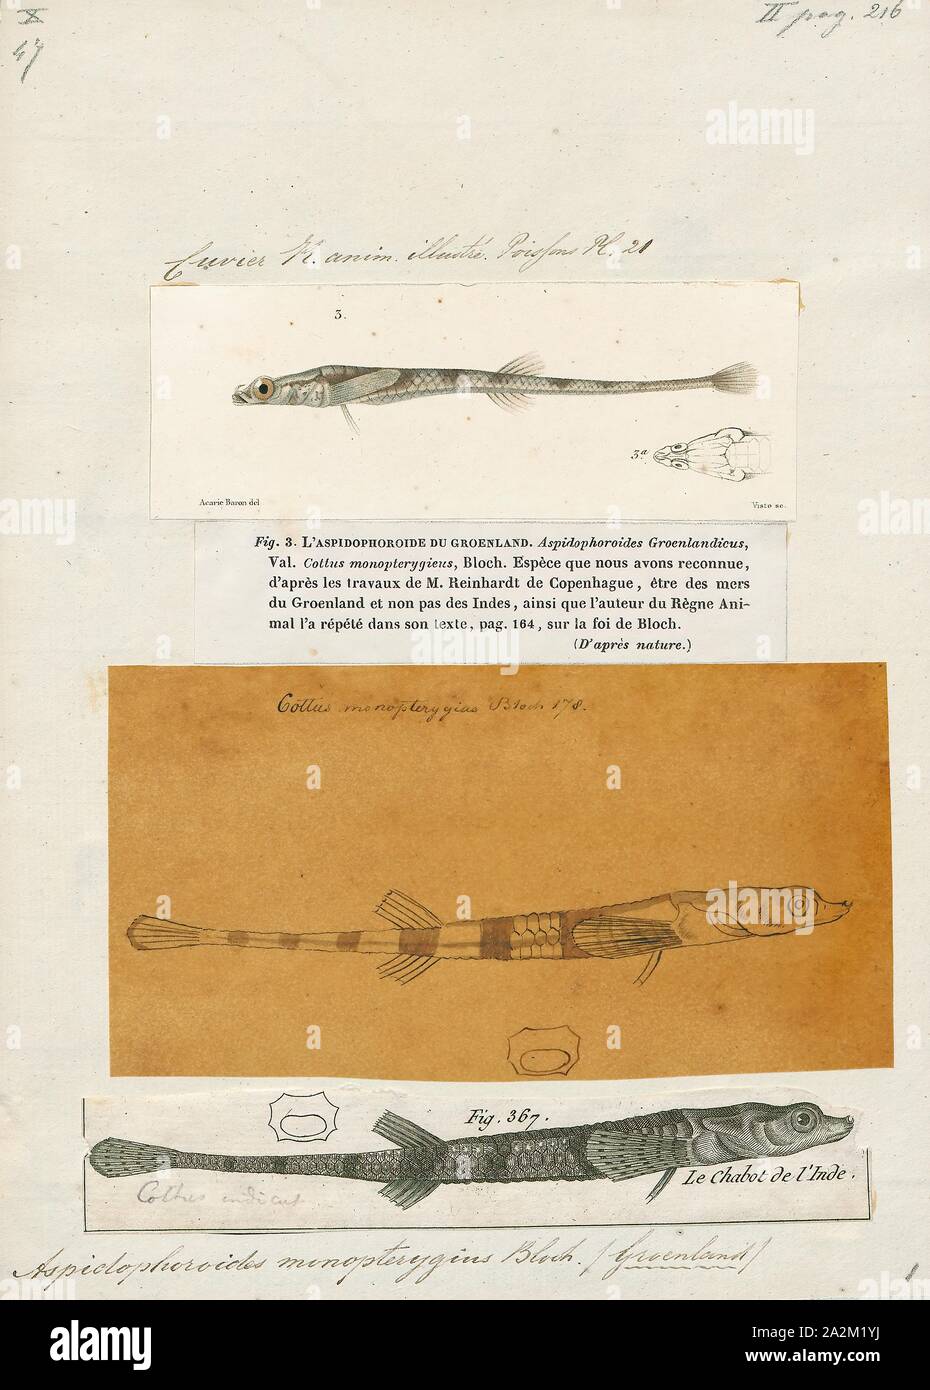 Aspidophoroides monopterygius, Print, The Alligatorfish (Aspidophoroides monopterygius, also known commonly as the Aleutian alligatorfish and the Atlantic alligatorfish) is a fish in the family Agonidae (poachers). It was described by Marcus Elieser Bloch in 1786. It is a marine, temperate water-dwelling fish which is known from the northwestern Atlantic Ocean, including western Greenland; Labrador, Canada; and Cape Cod, Massachusetts, USA. It dwells at a depth range of 0–695 metres, most often around 60–150 m, and inhabits sand and mud bottoms mostly on the lower continental shelf all year Stock Photo